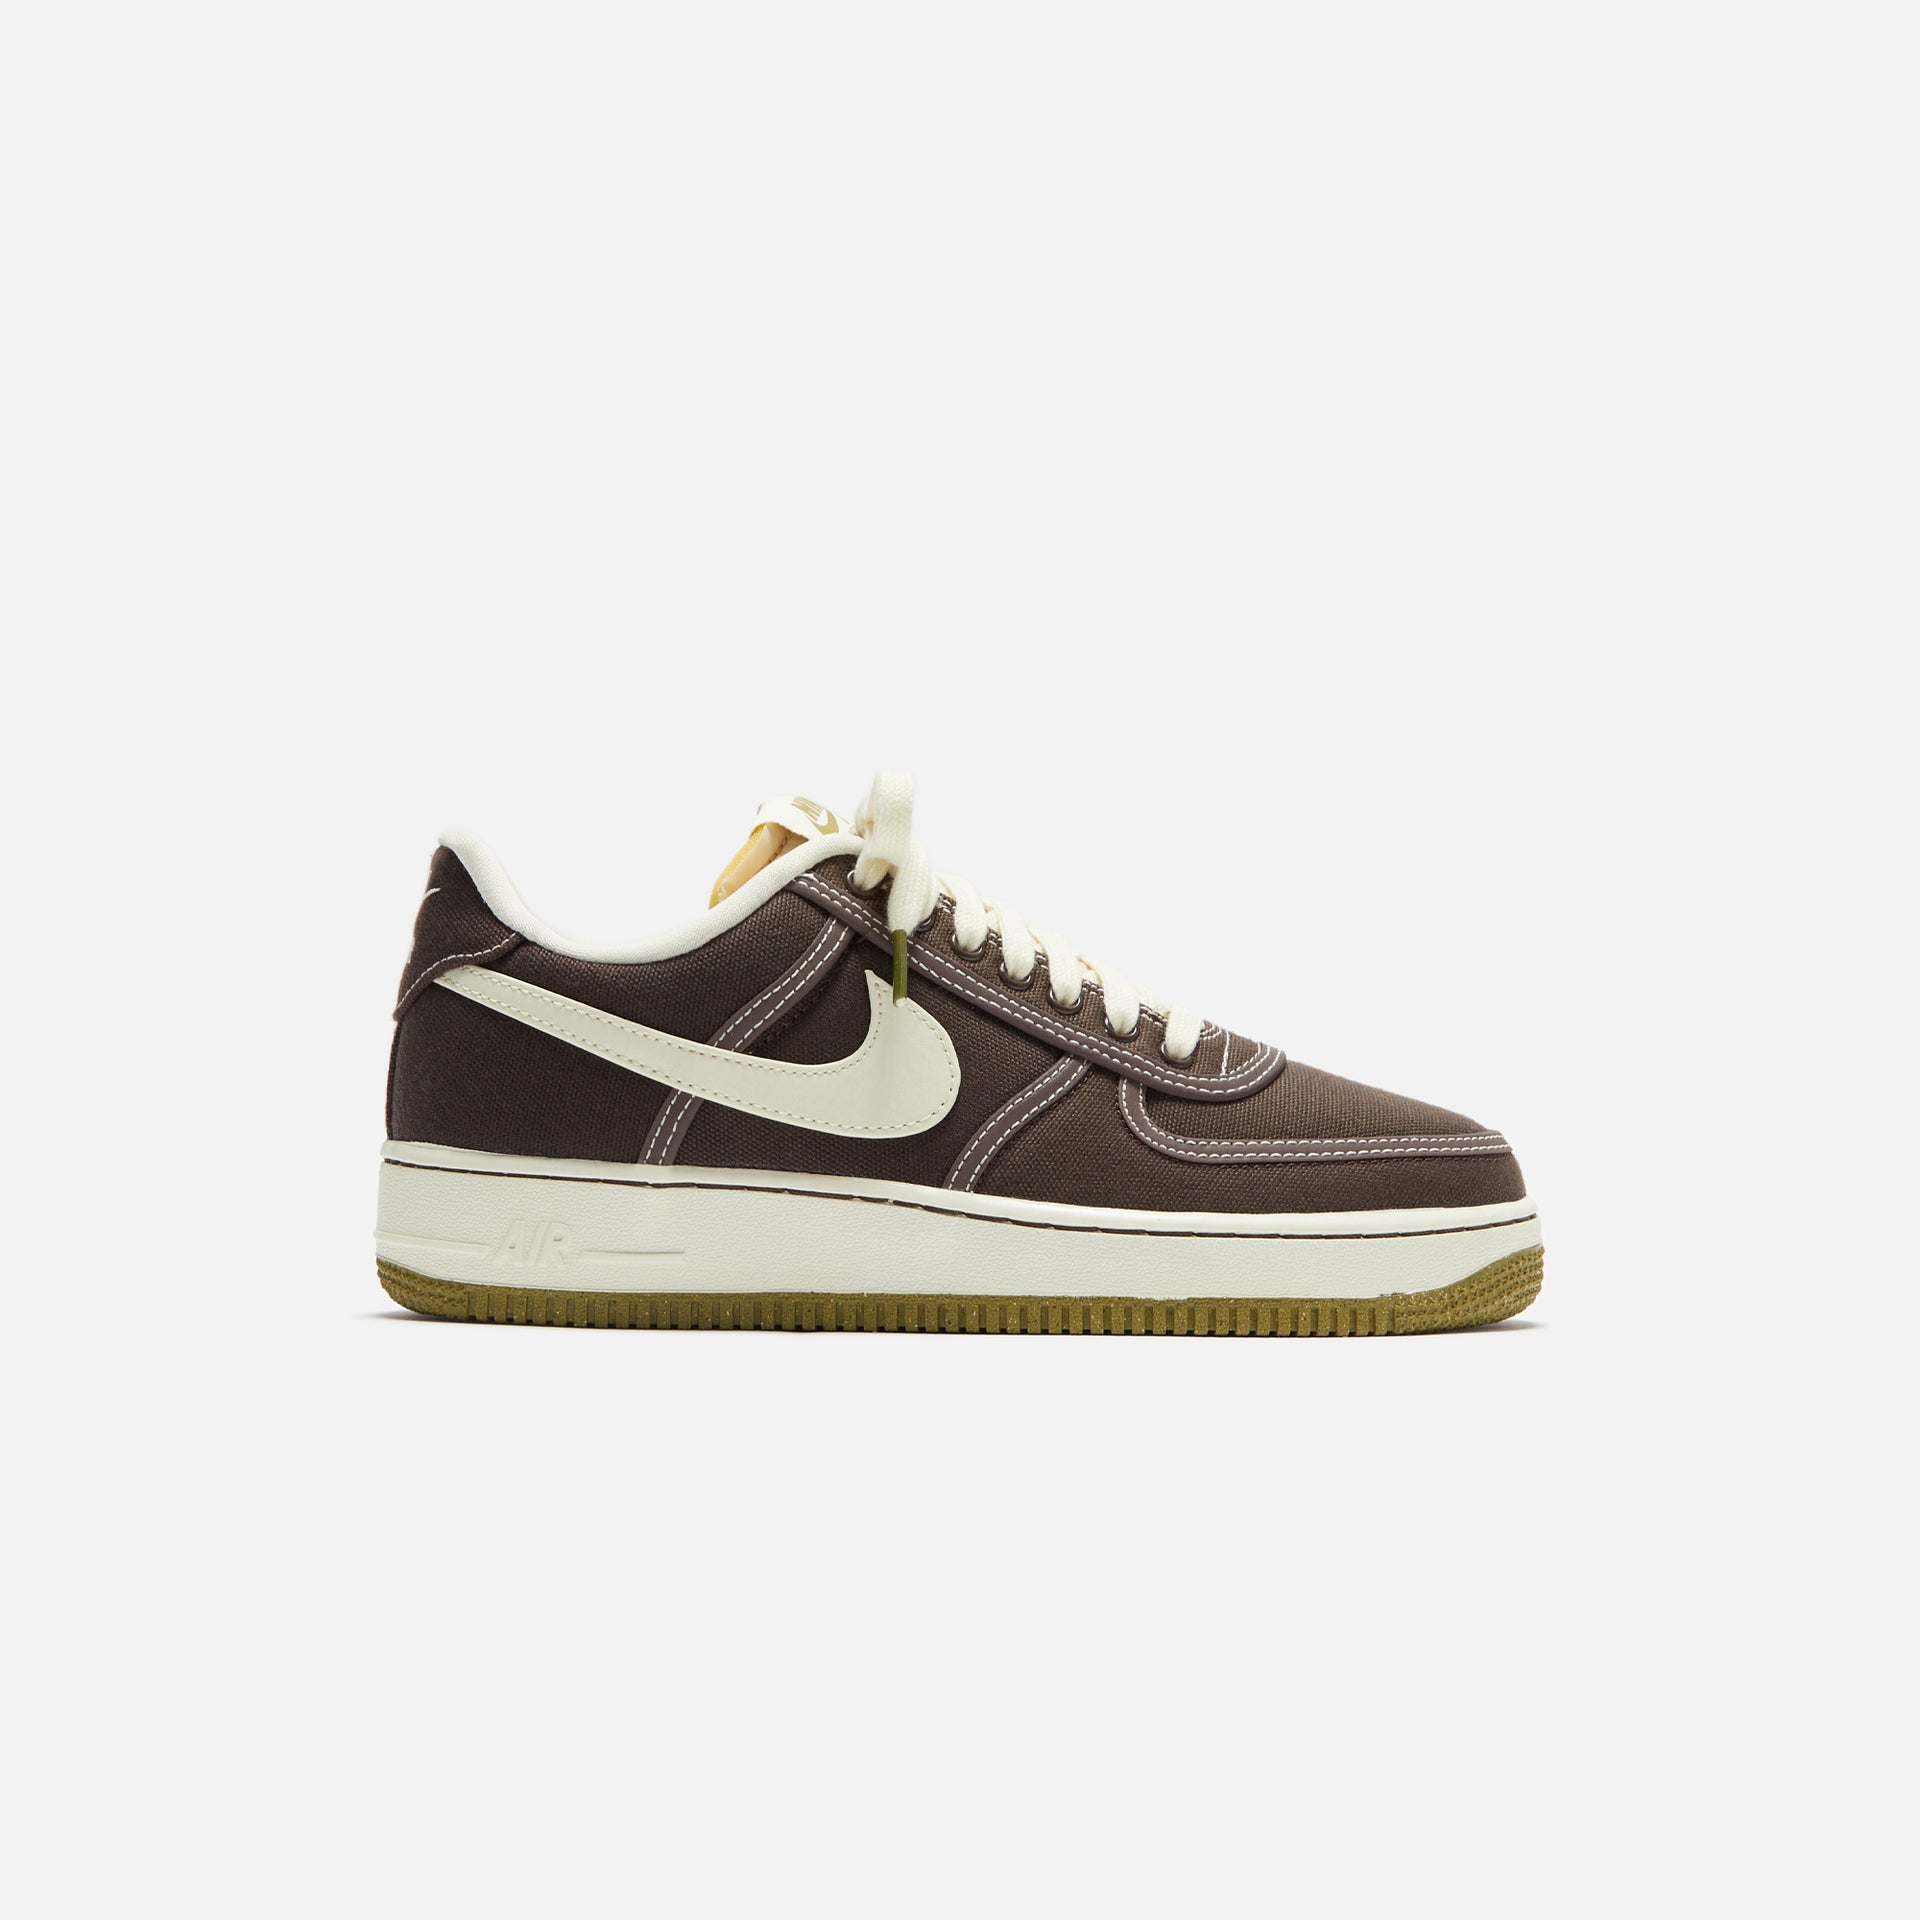 Nike Whos Ready to Revisit the Nike Del Sol - Baroque Brown / Coconut Milk / Pacific Moss